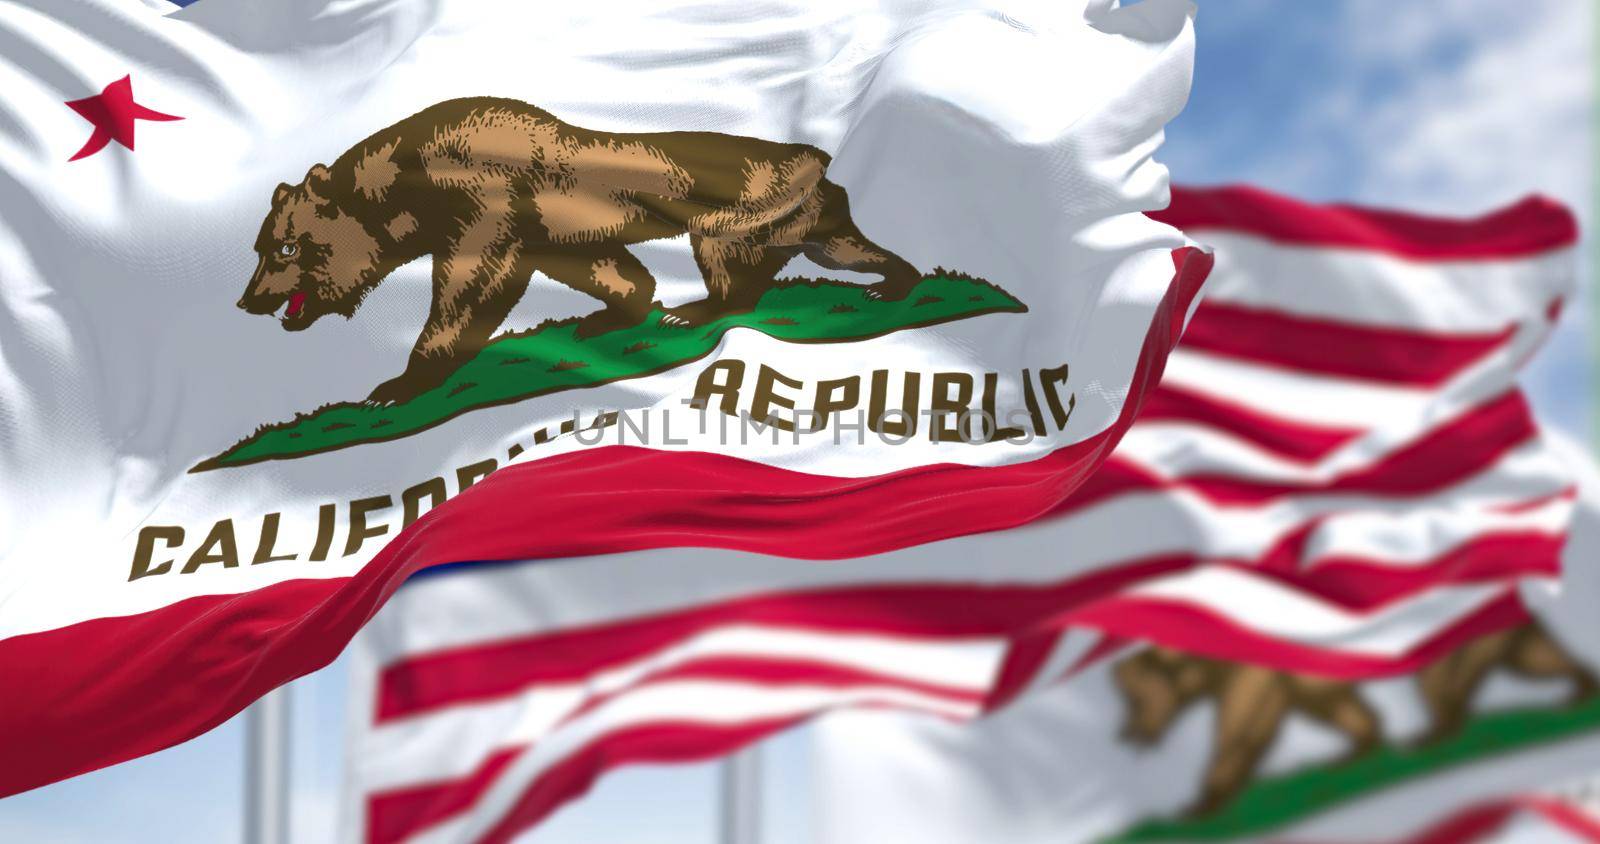 Two California state flags flying along with the national flag of the United States of America by rarrarorro